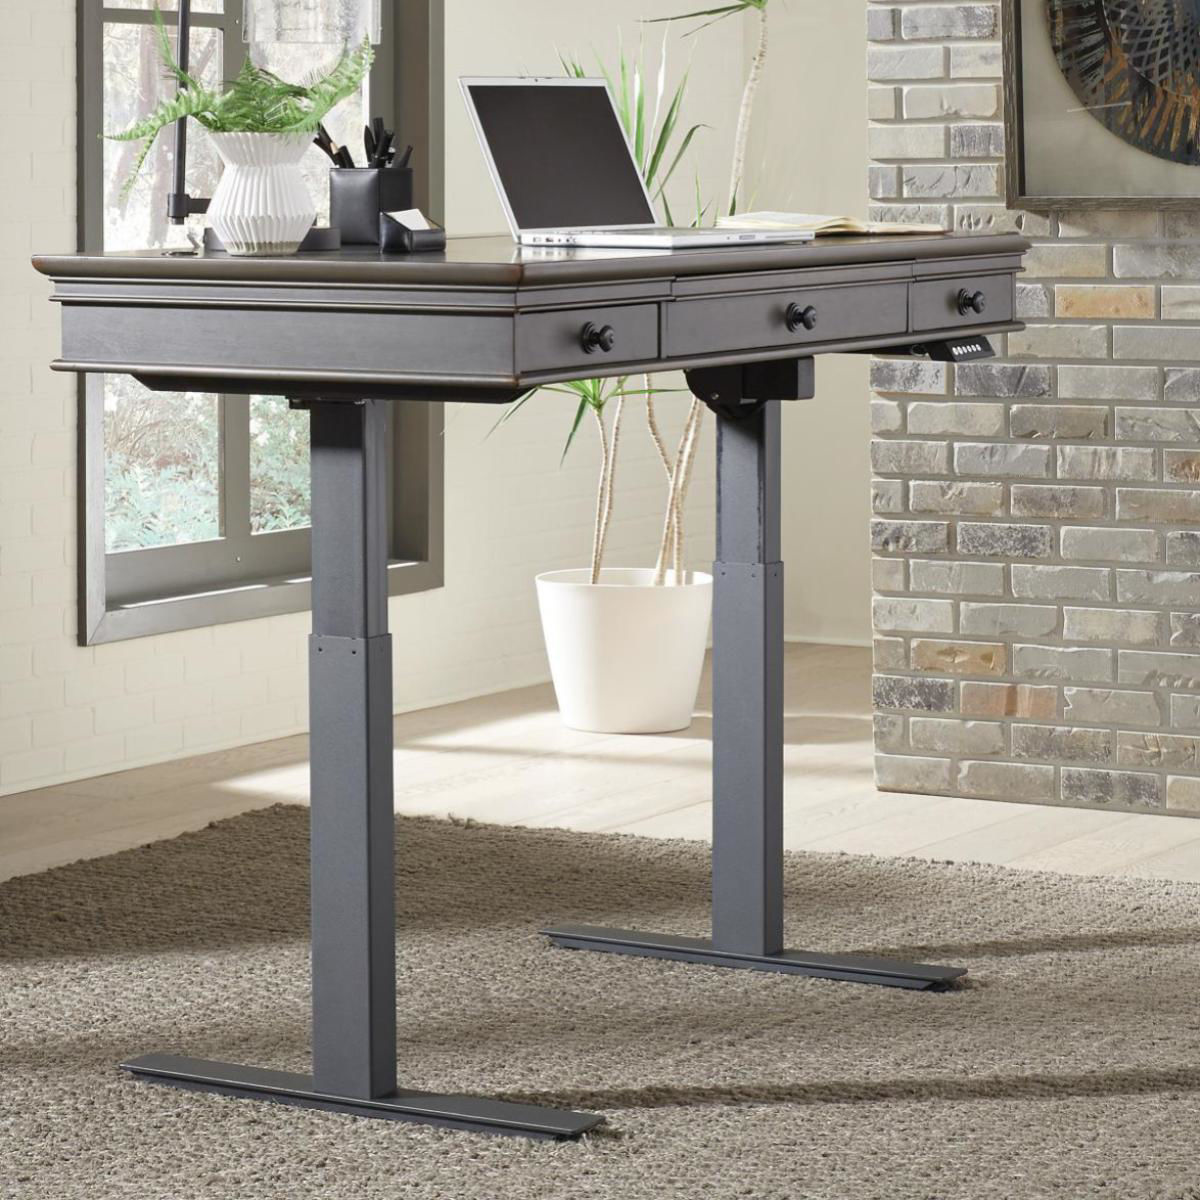 Picture of Oxford Adjustable Desk Set in Peppercorn